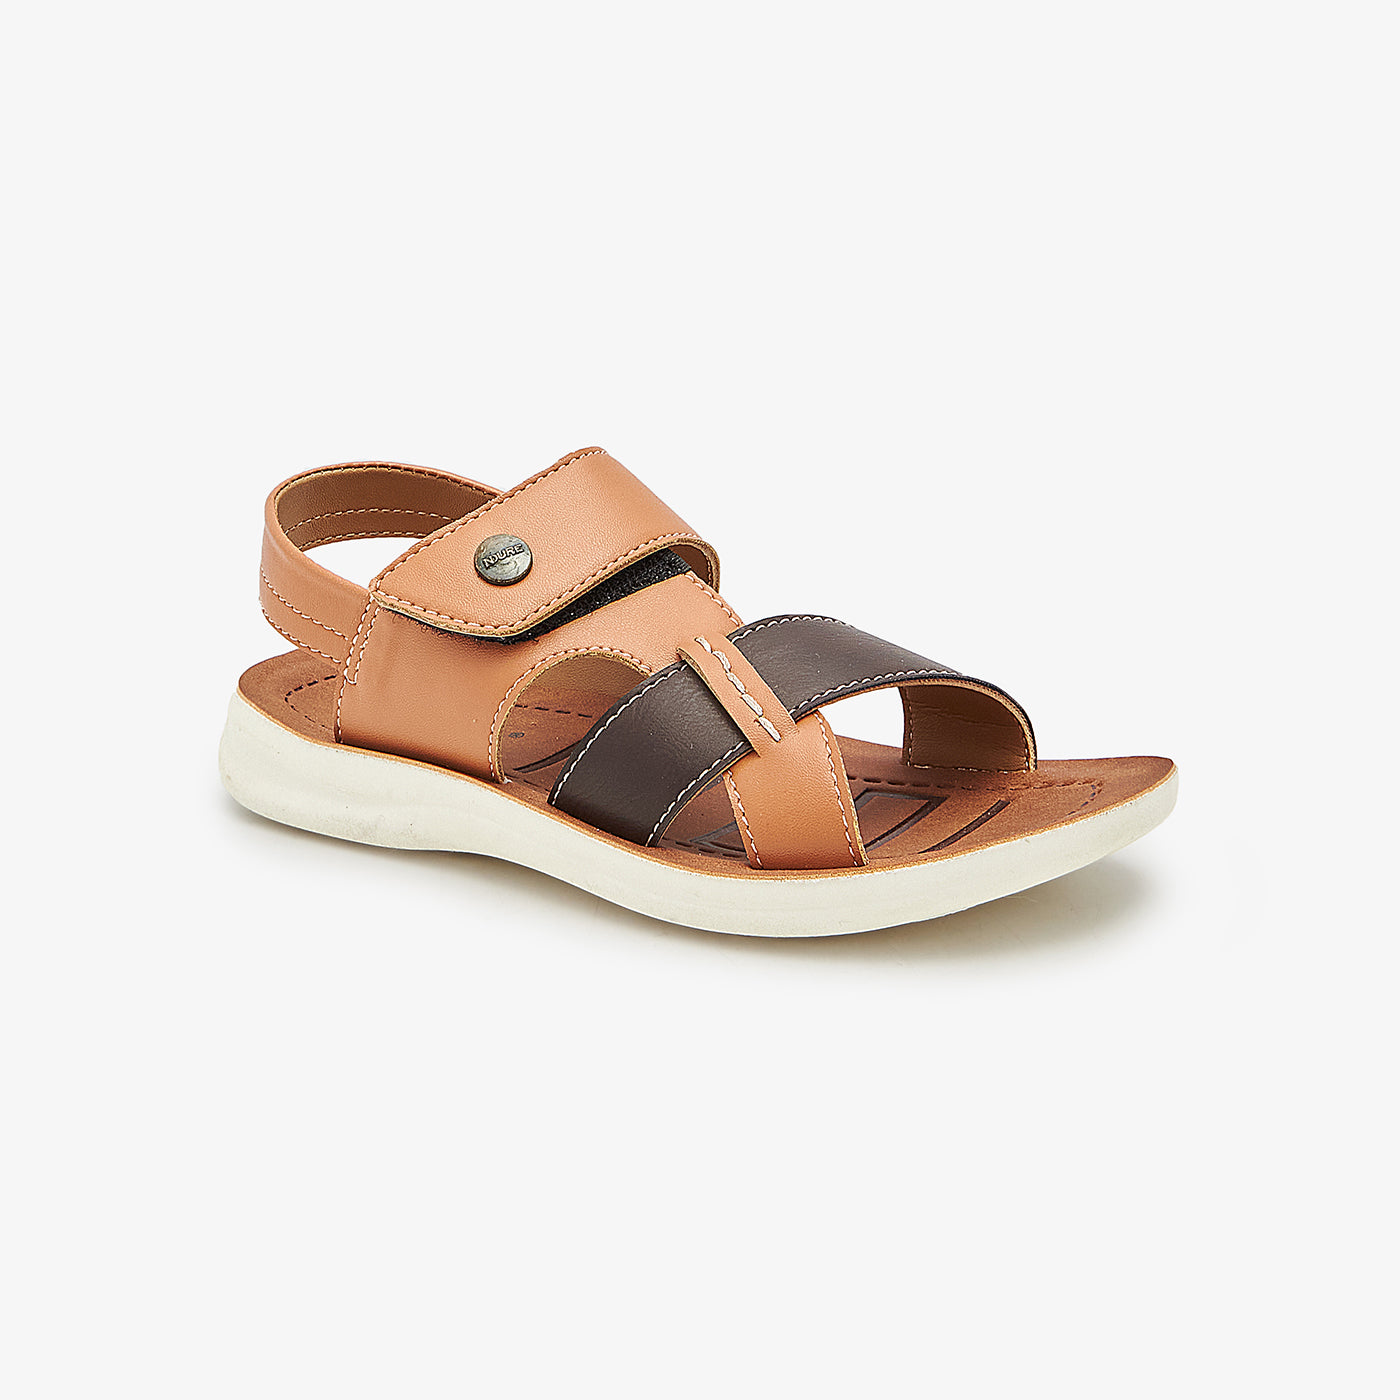 Boys Casual Sandals